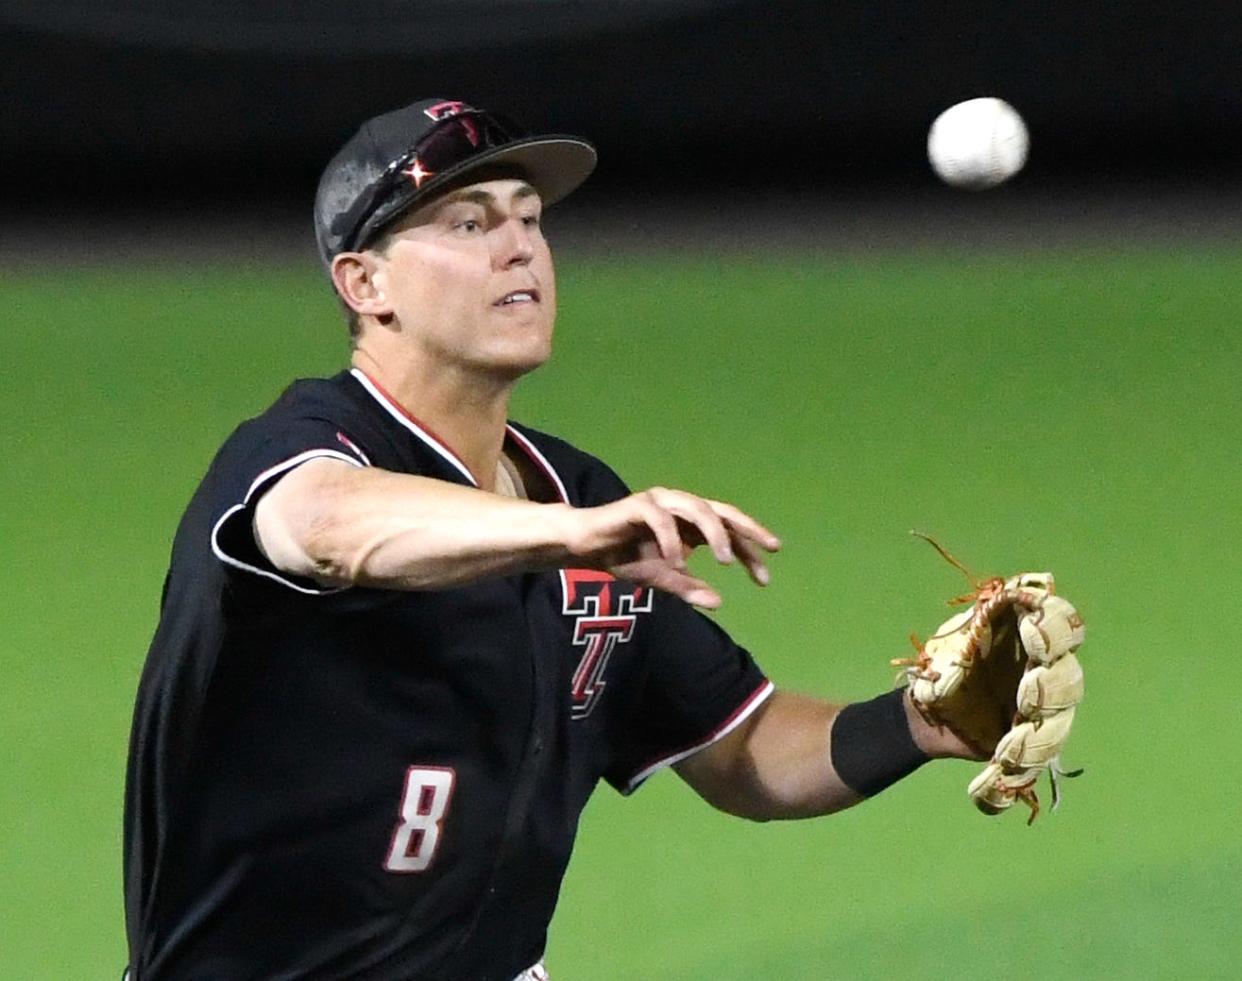 Senior shortstop Kurt Wilson and No. 8 Texas Tech visit No. 3 Oklahoma State for a three-game Big 12 baseball series Friday, Saturday and Sunday. Oklahoma State is the conference leader and has a two-game cushion on the Red Raiders.